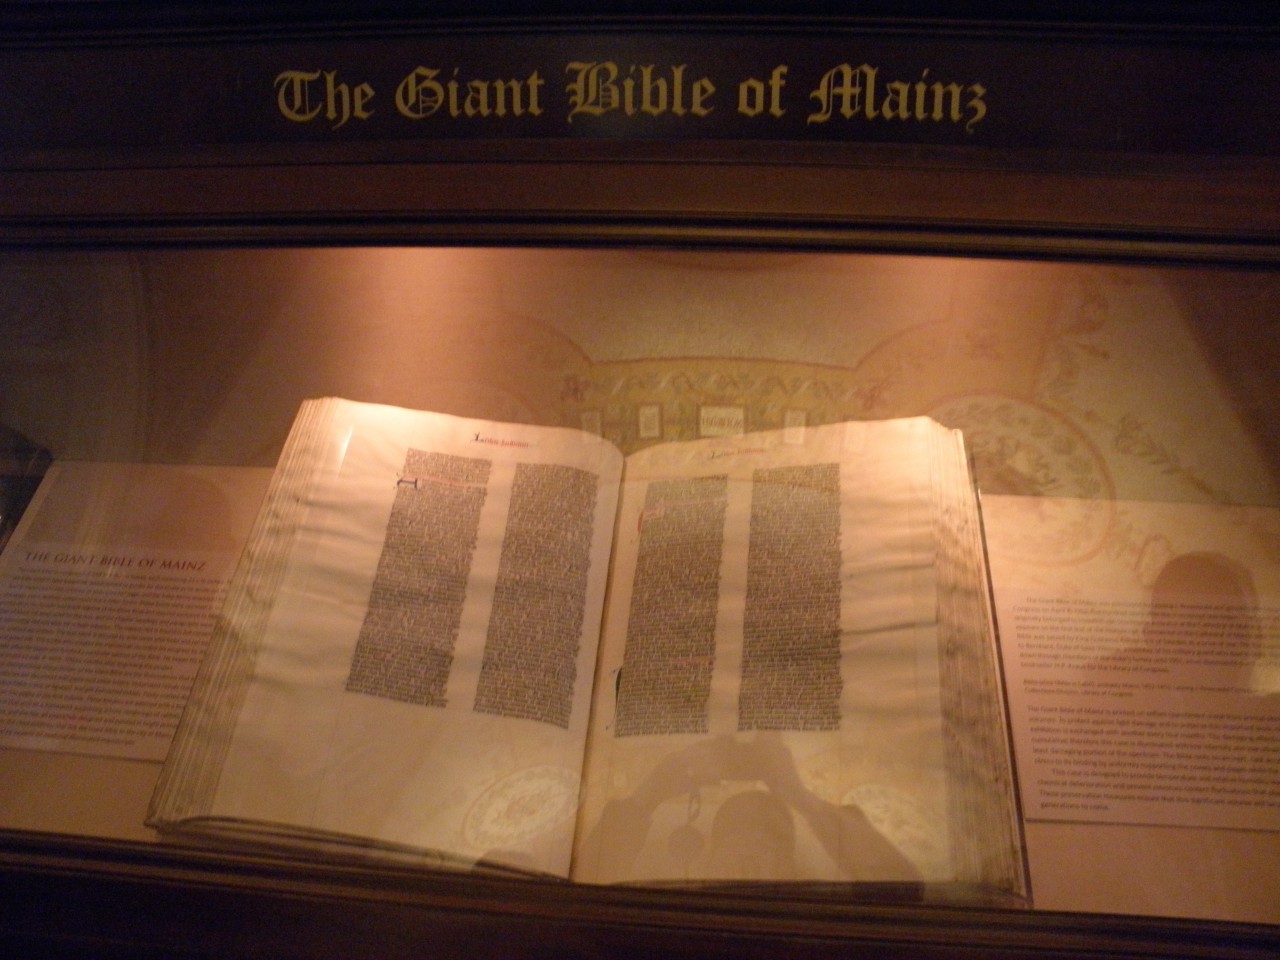 Library of Congress – The Giant Bible of Mainz